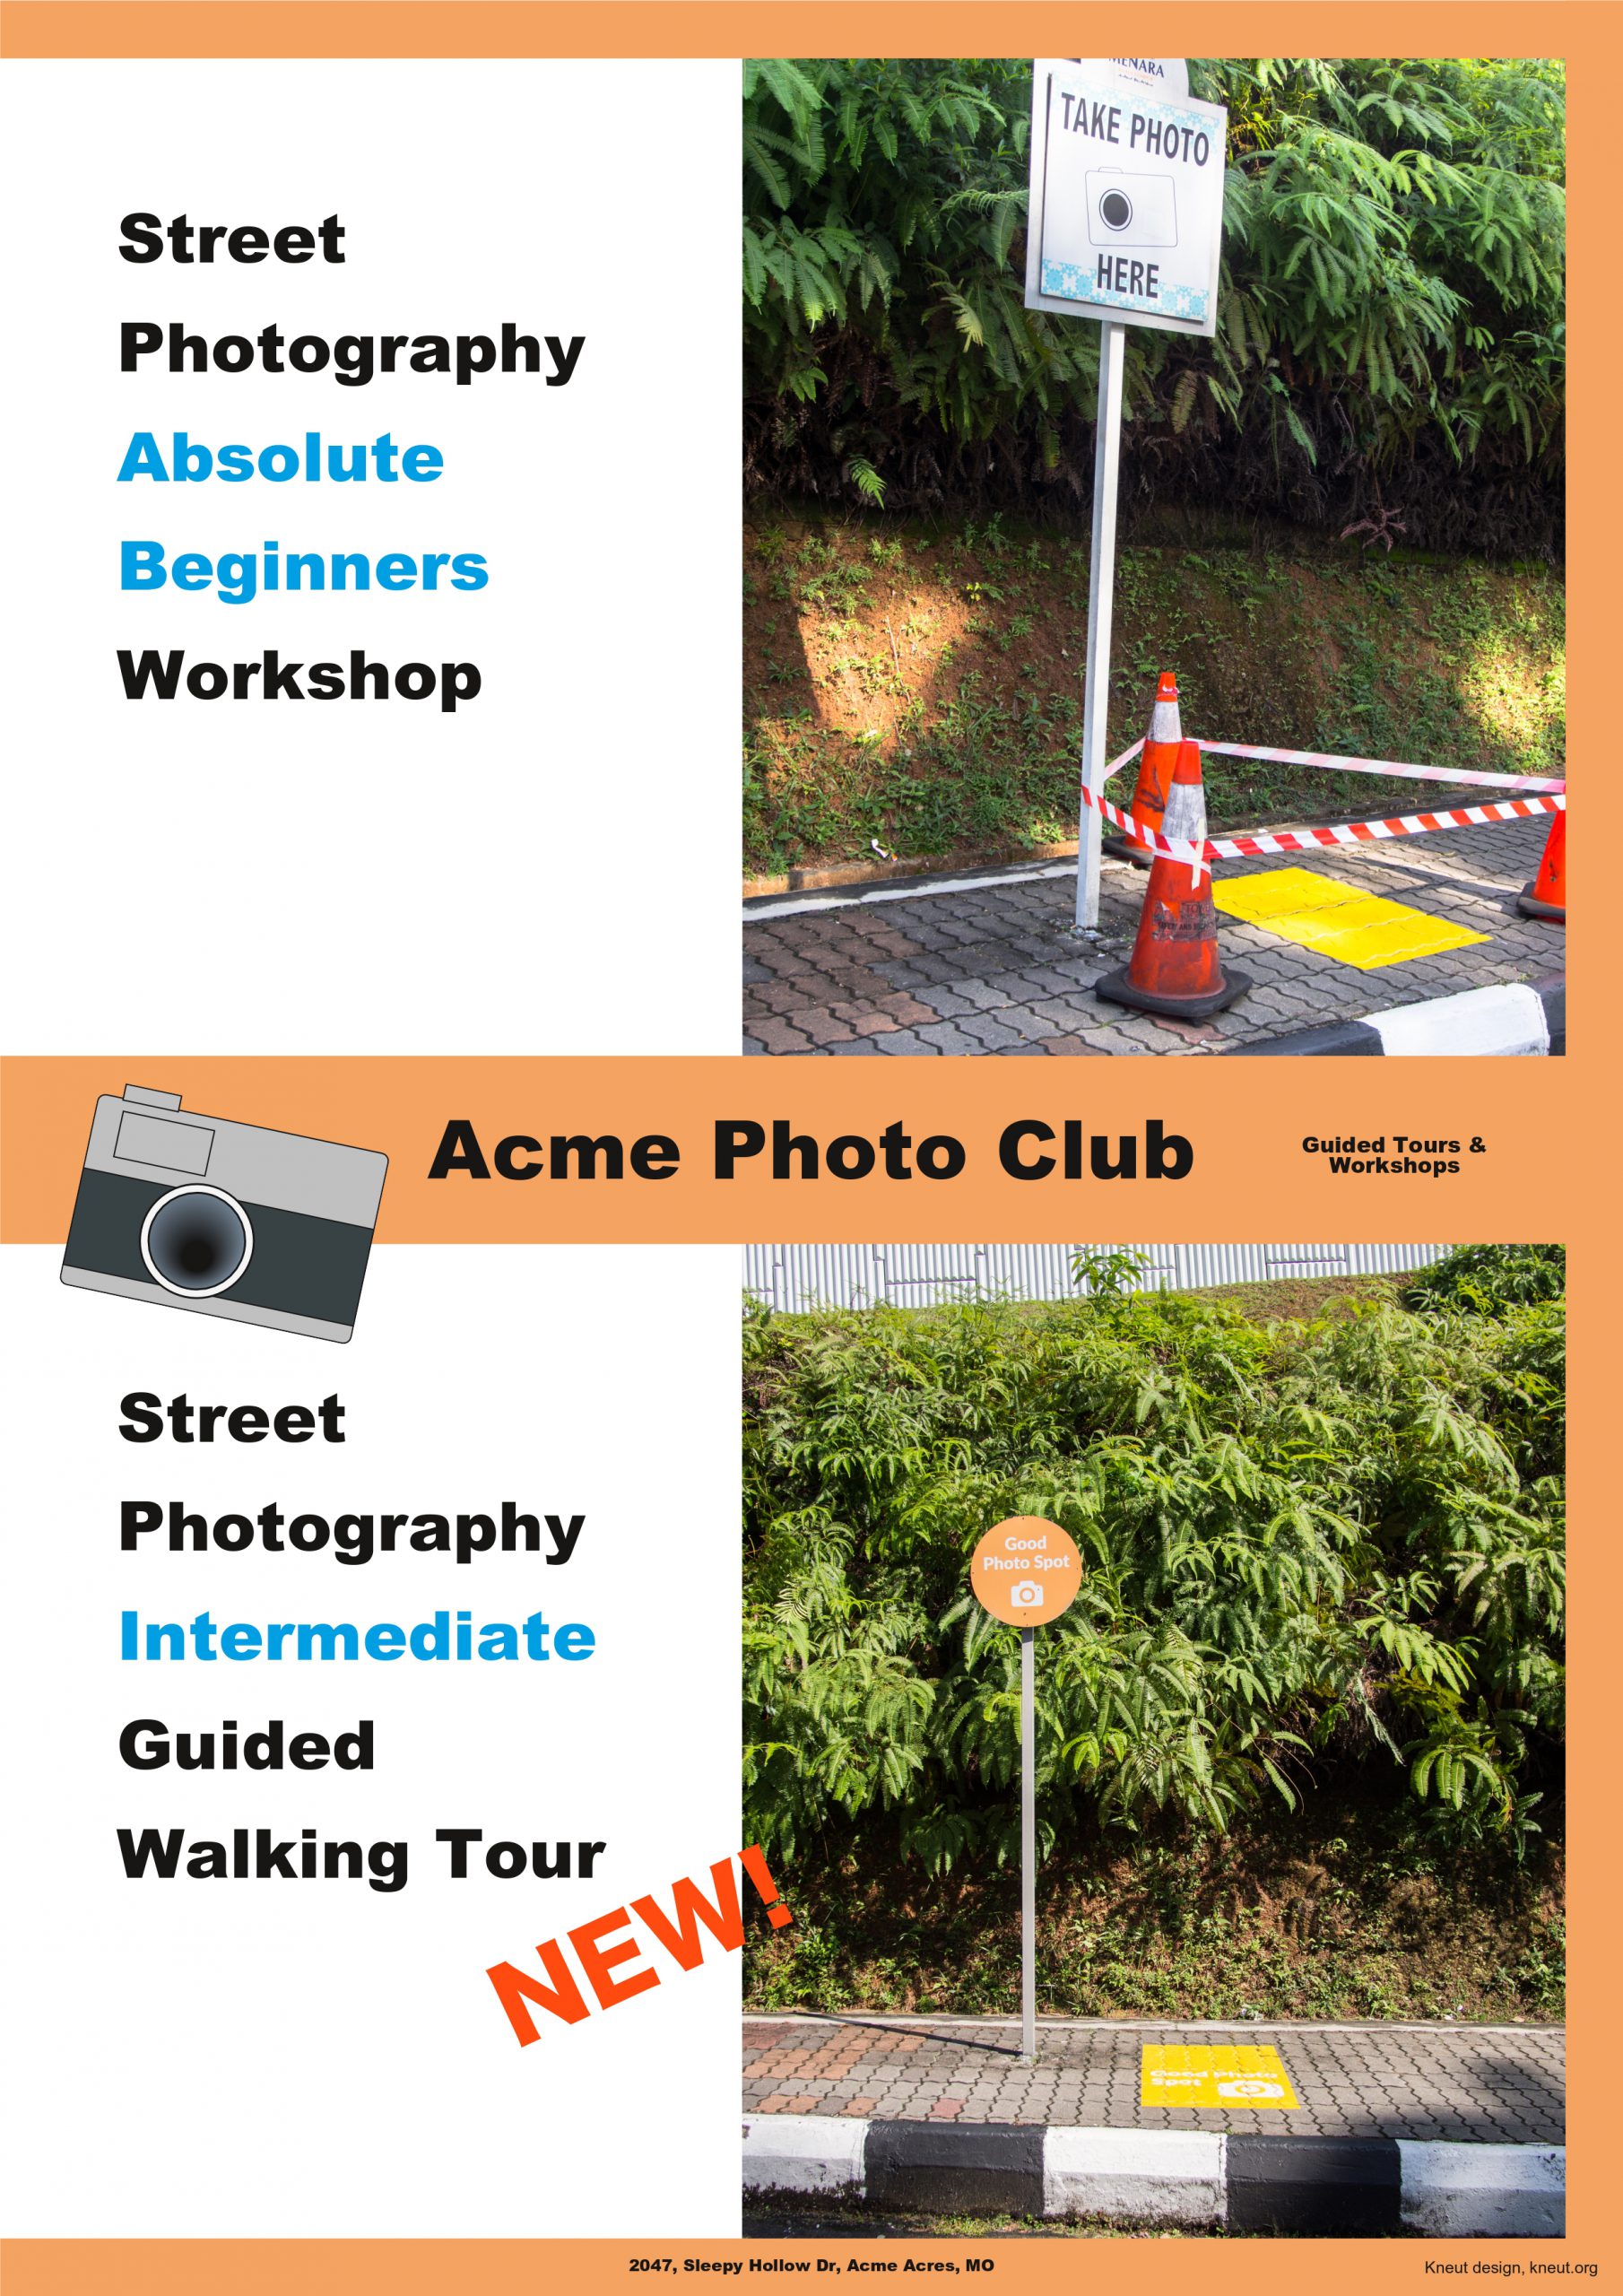 Acme Photo Club – Street Photography Guided Tours and Workshops – poster